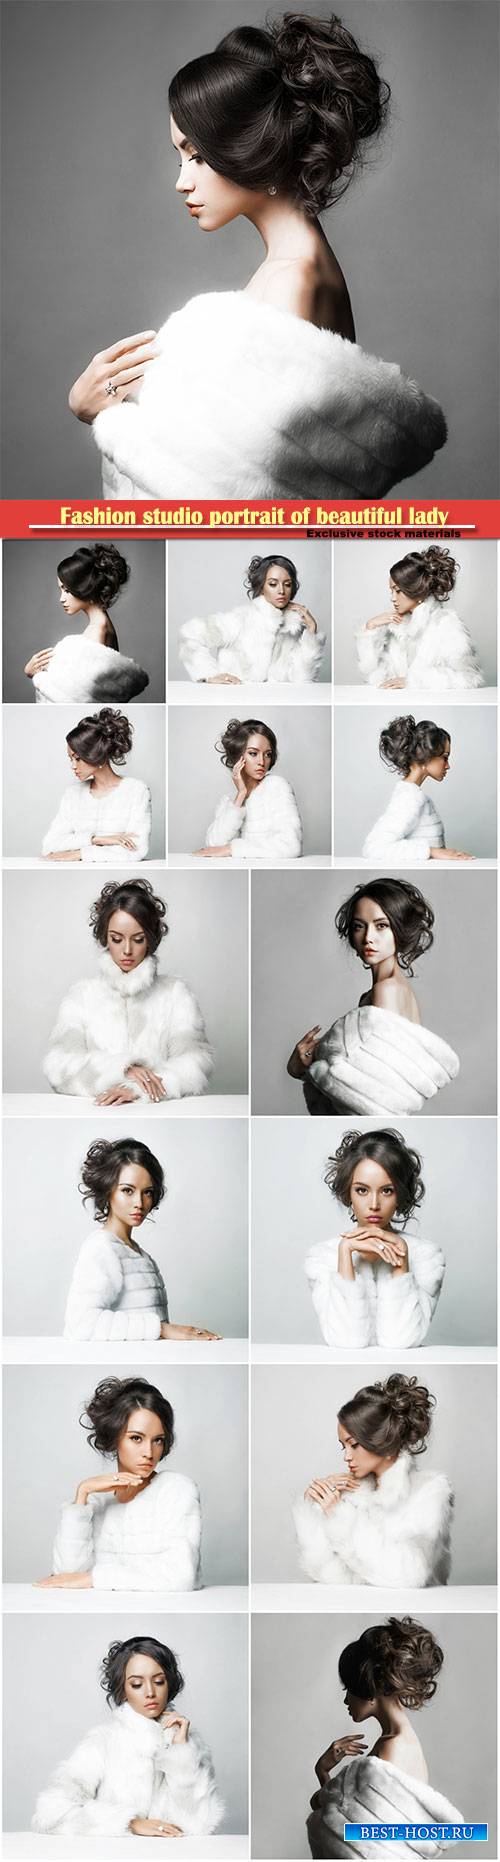 Fashion studio portrait of beautiful lady with elegant hairstyle in white f ...